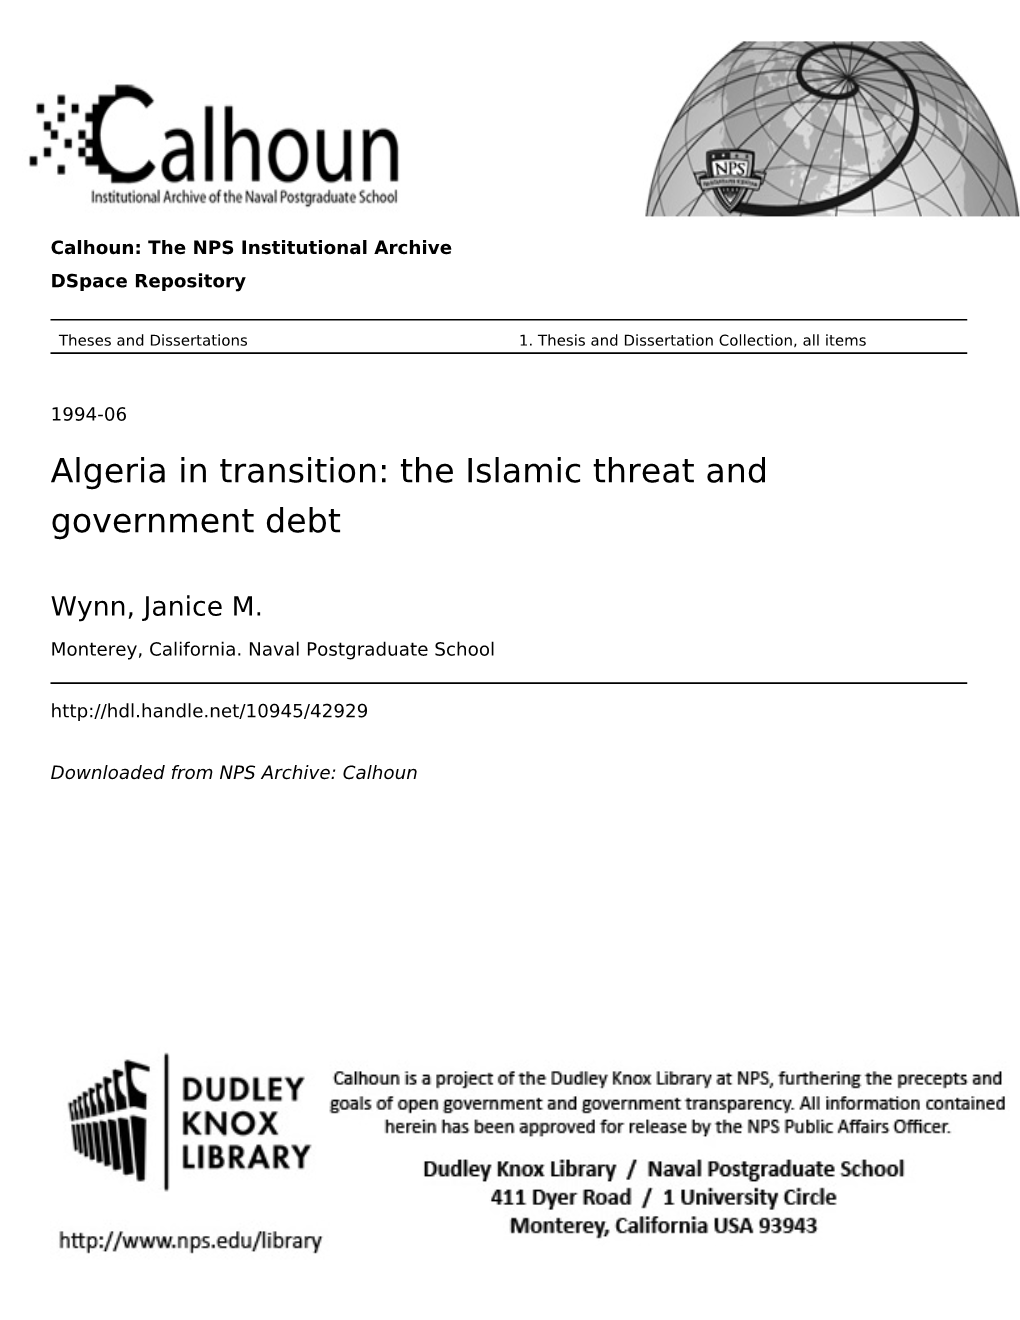 Algeria in Transition: the Islamic Threat and Government Debt